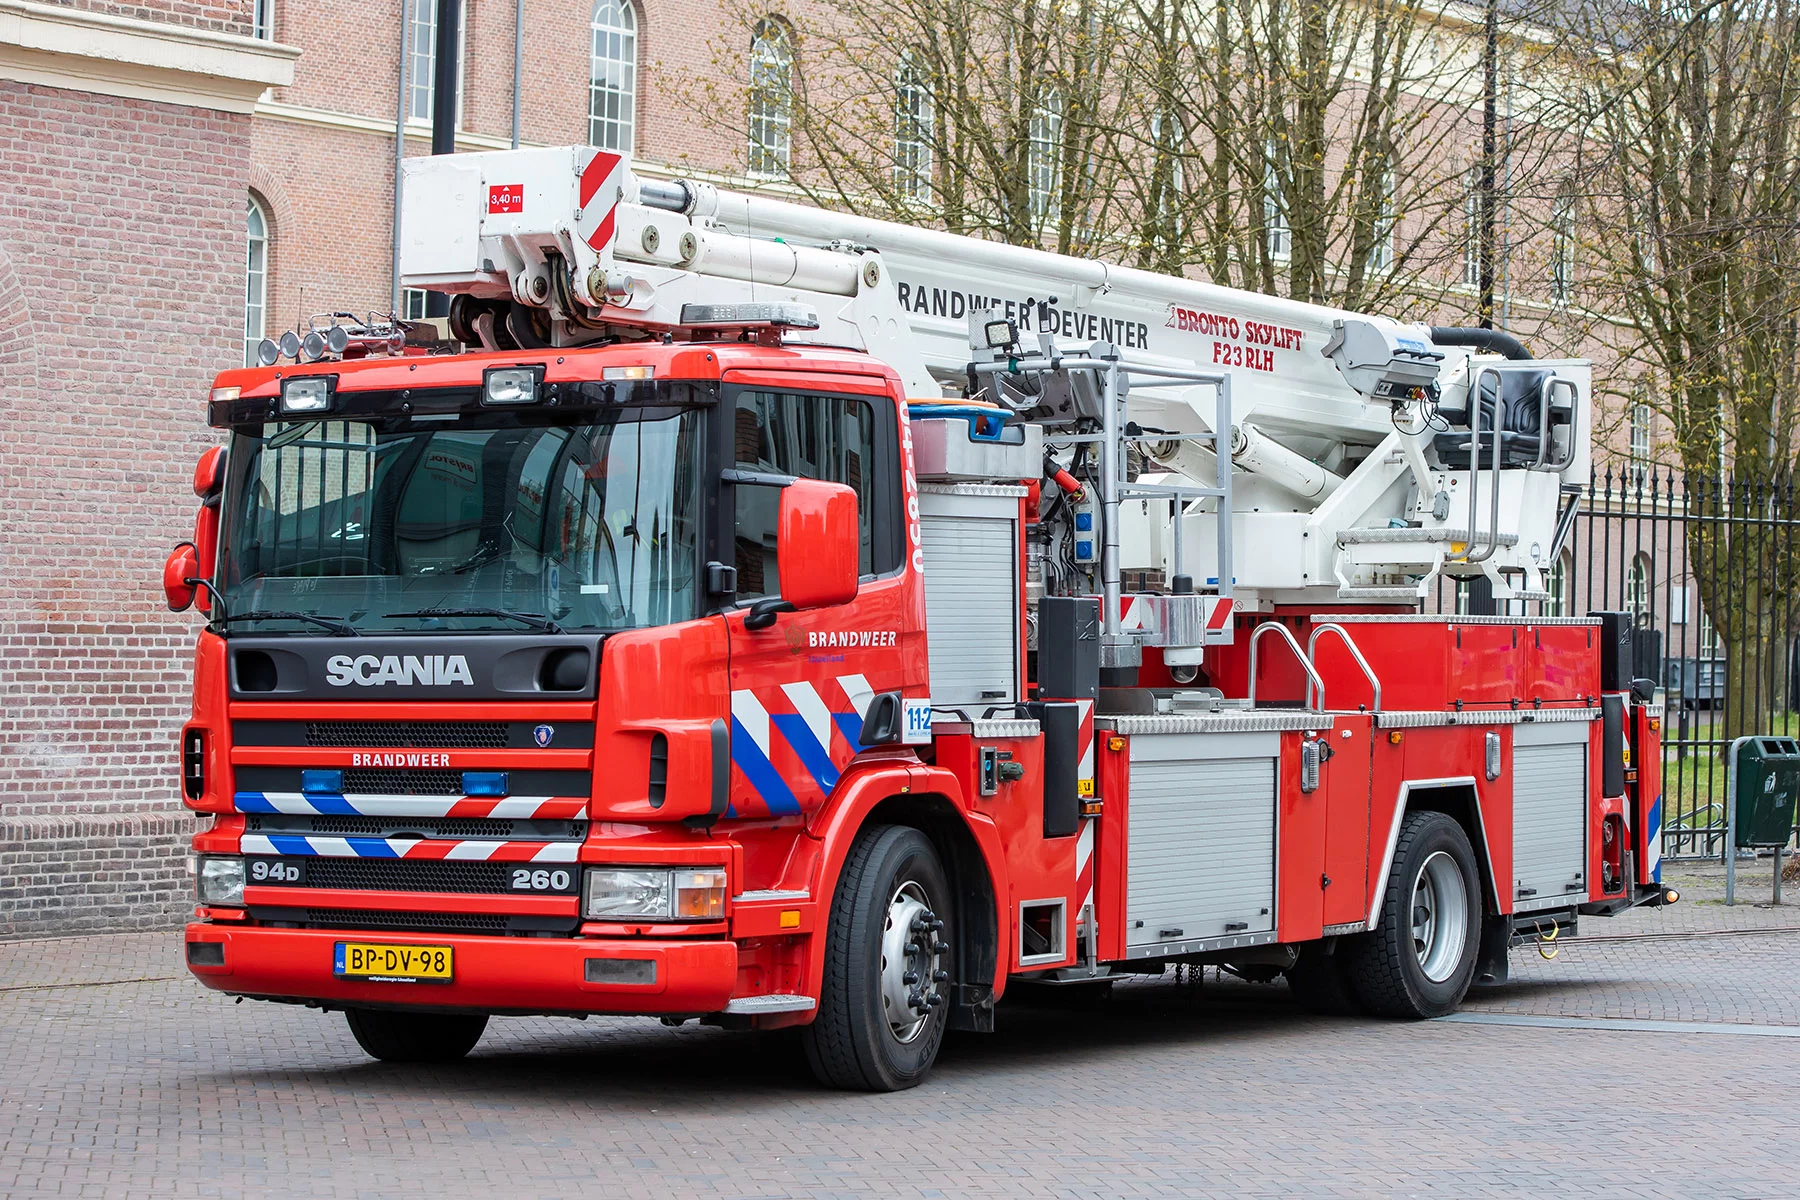 A fire truck operated by Brandweer in the Netherlands